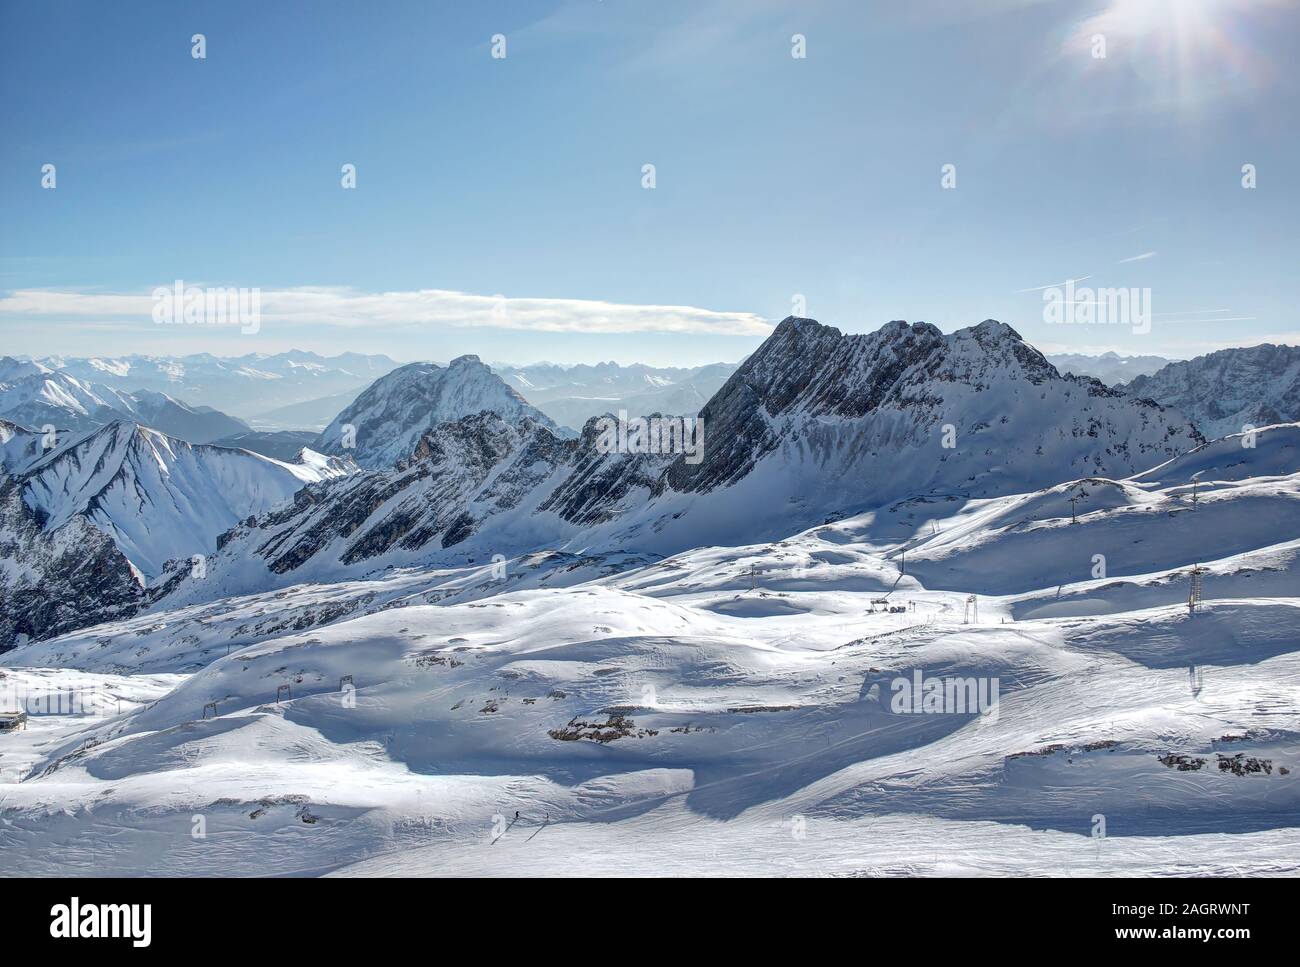 Glacier skiing - Zugspitze mountain. The Zugspitze, at 2,962 meters above sea level, is the highest mountain in Germany. Stock Photo